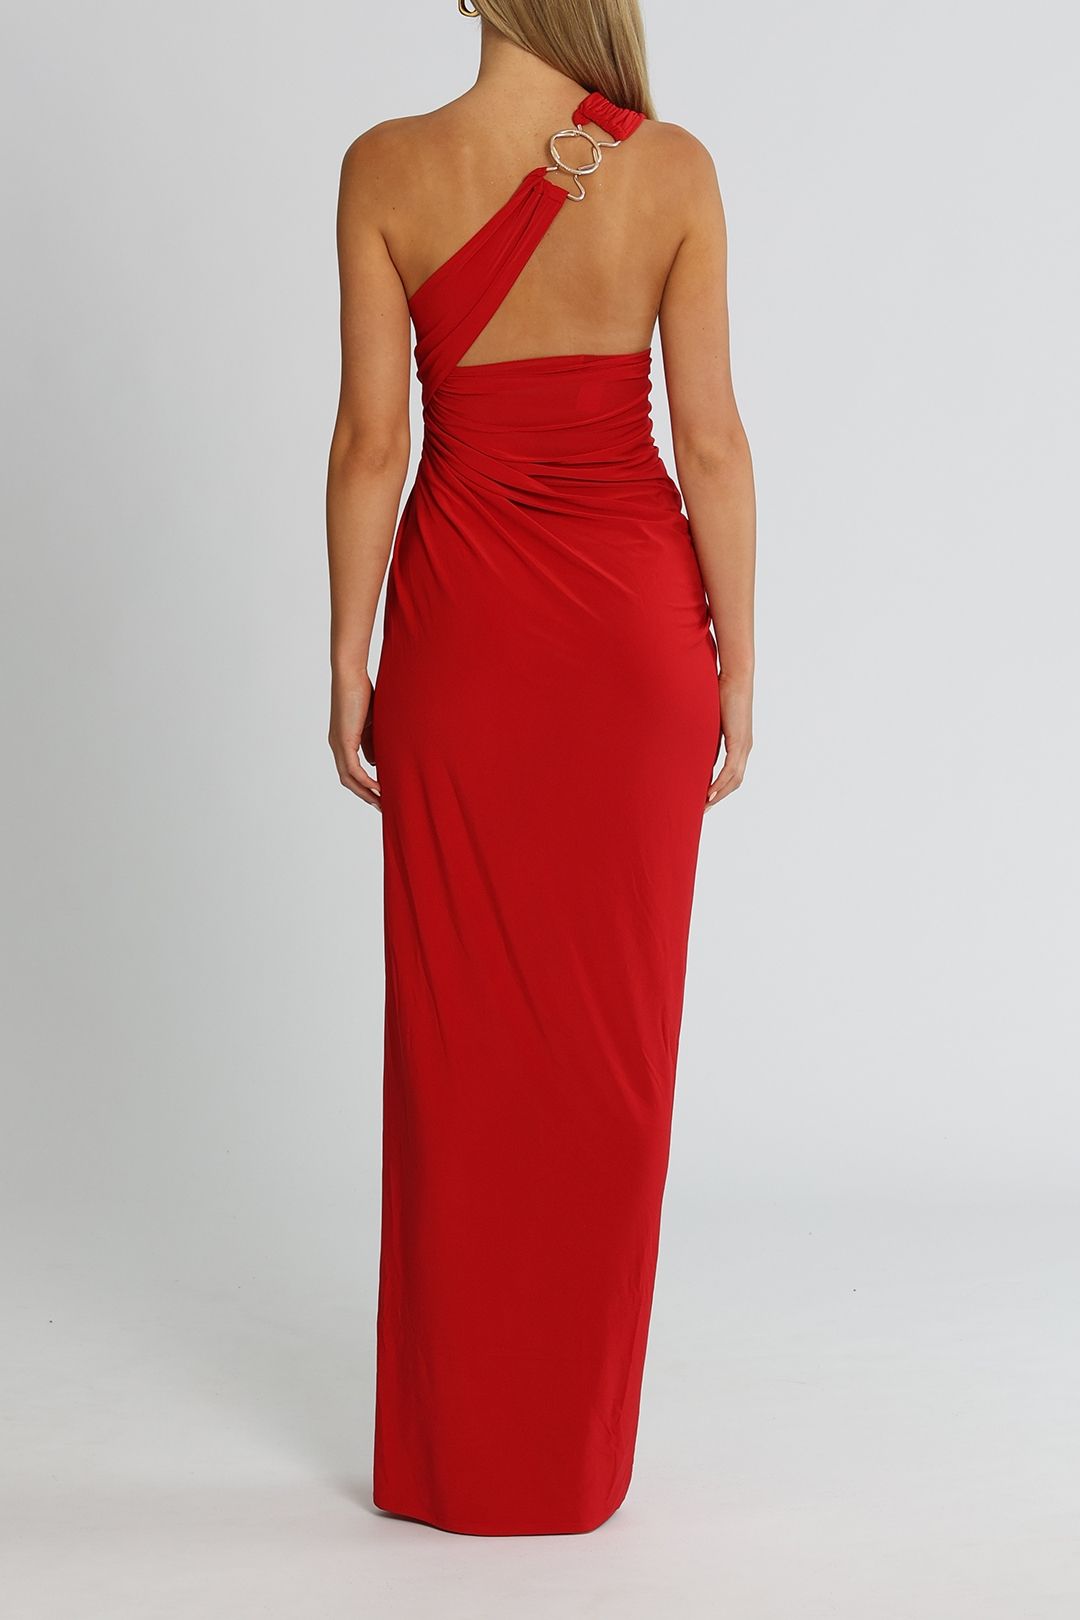 J. Angelique Valeria Gown Red Backless